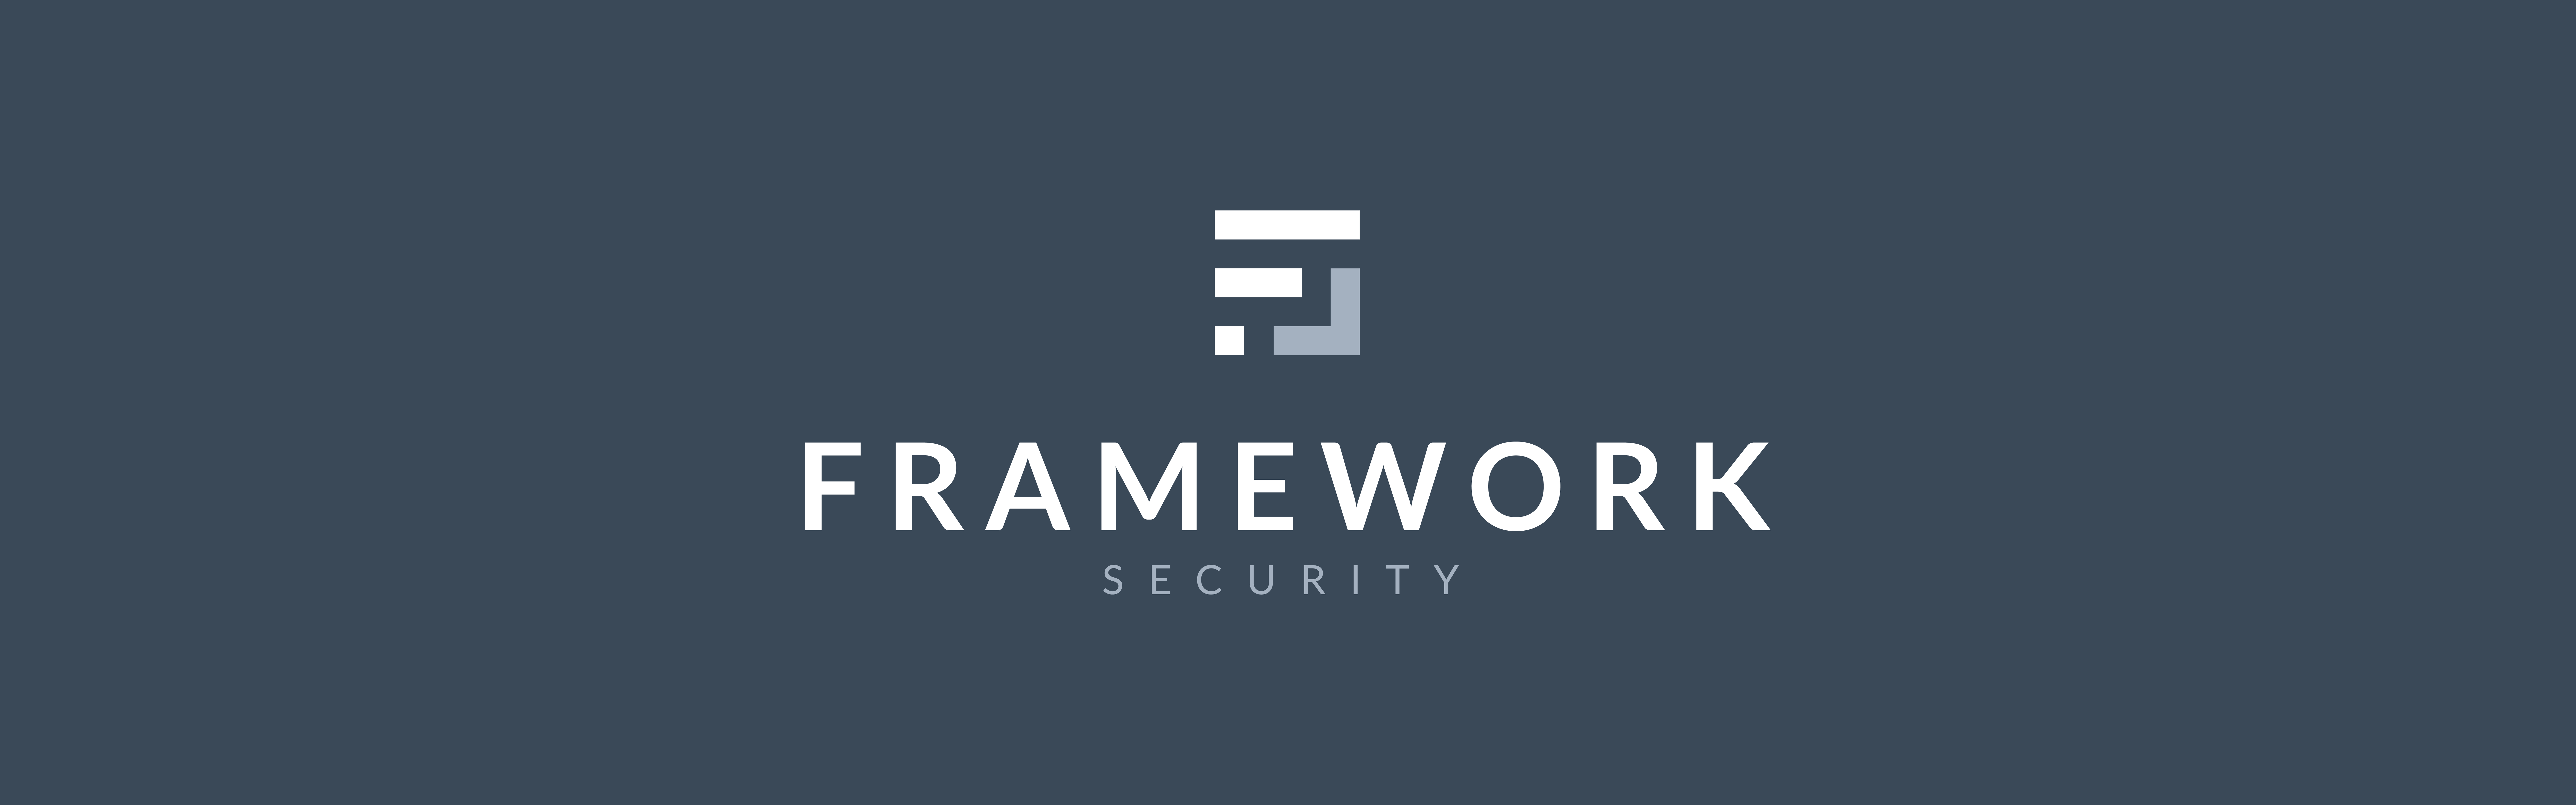 Framework Security company logo displayed on a gray background.